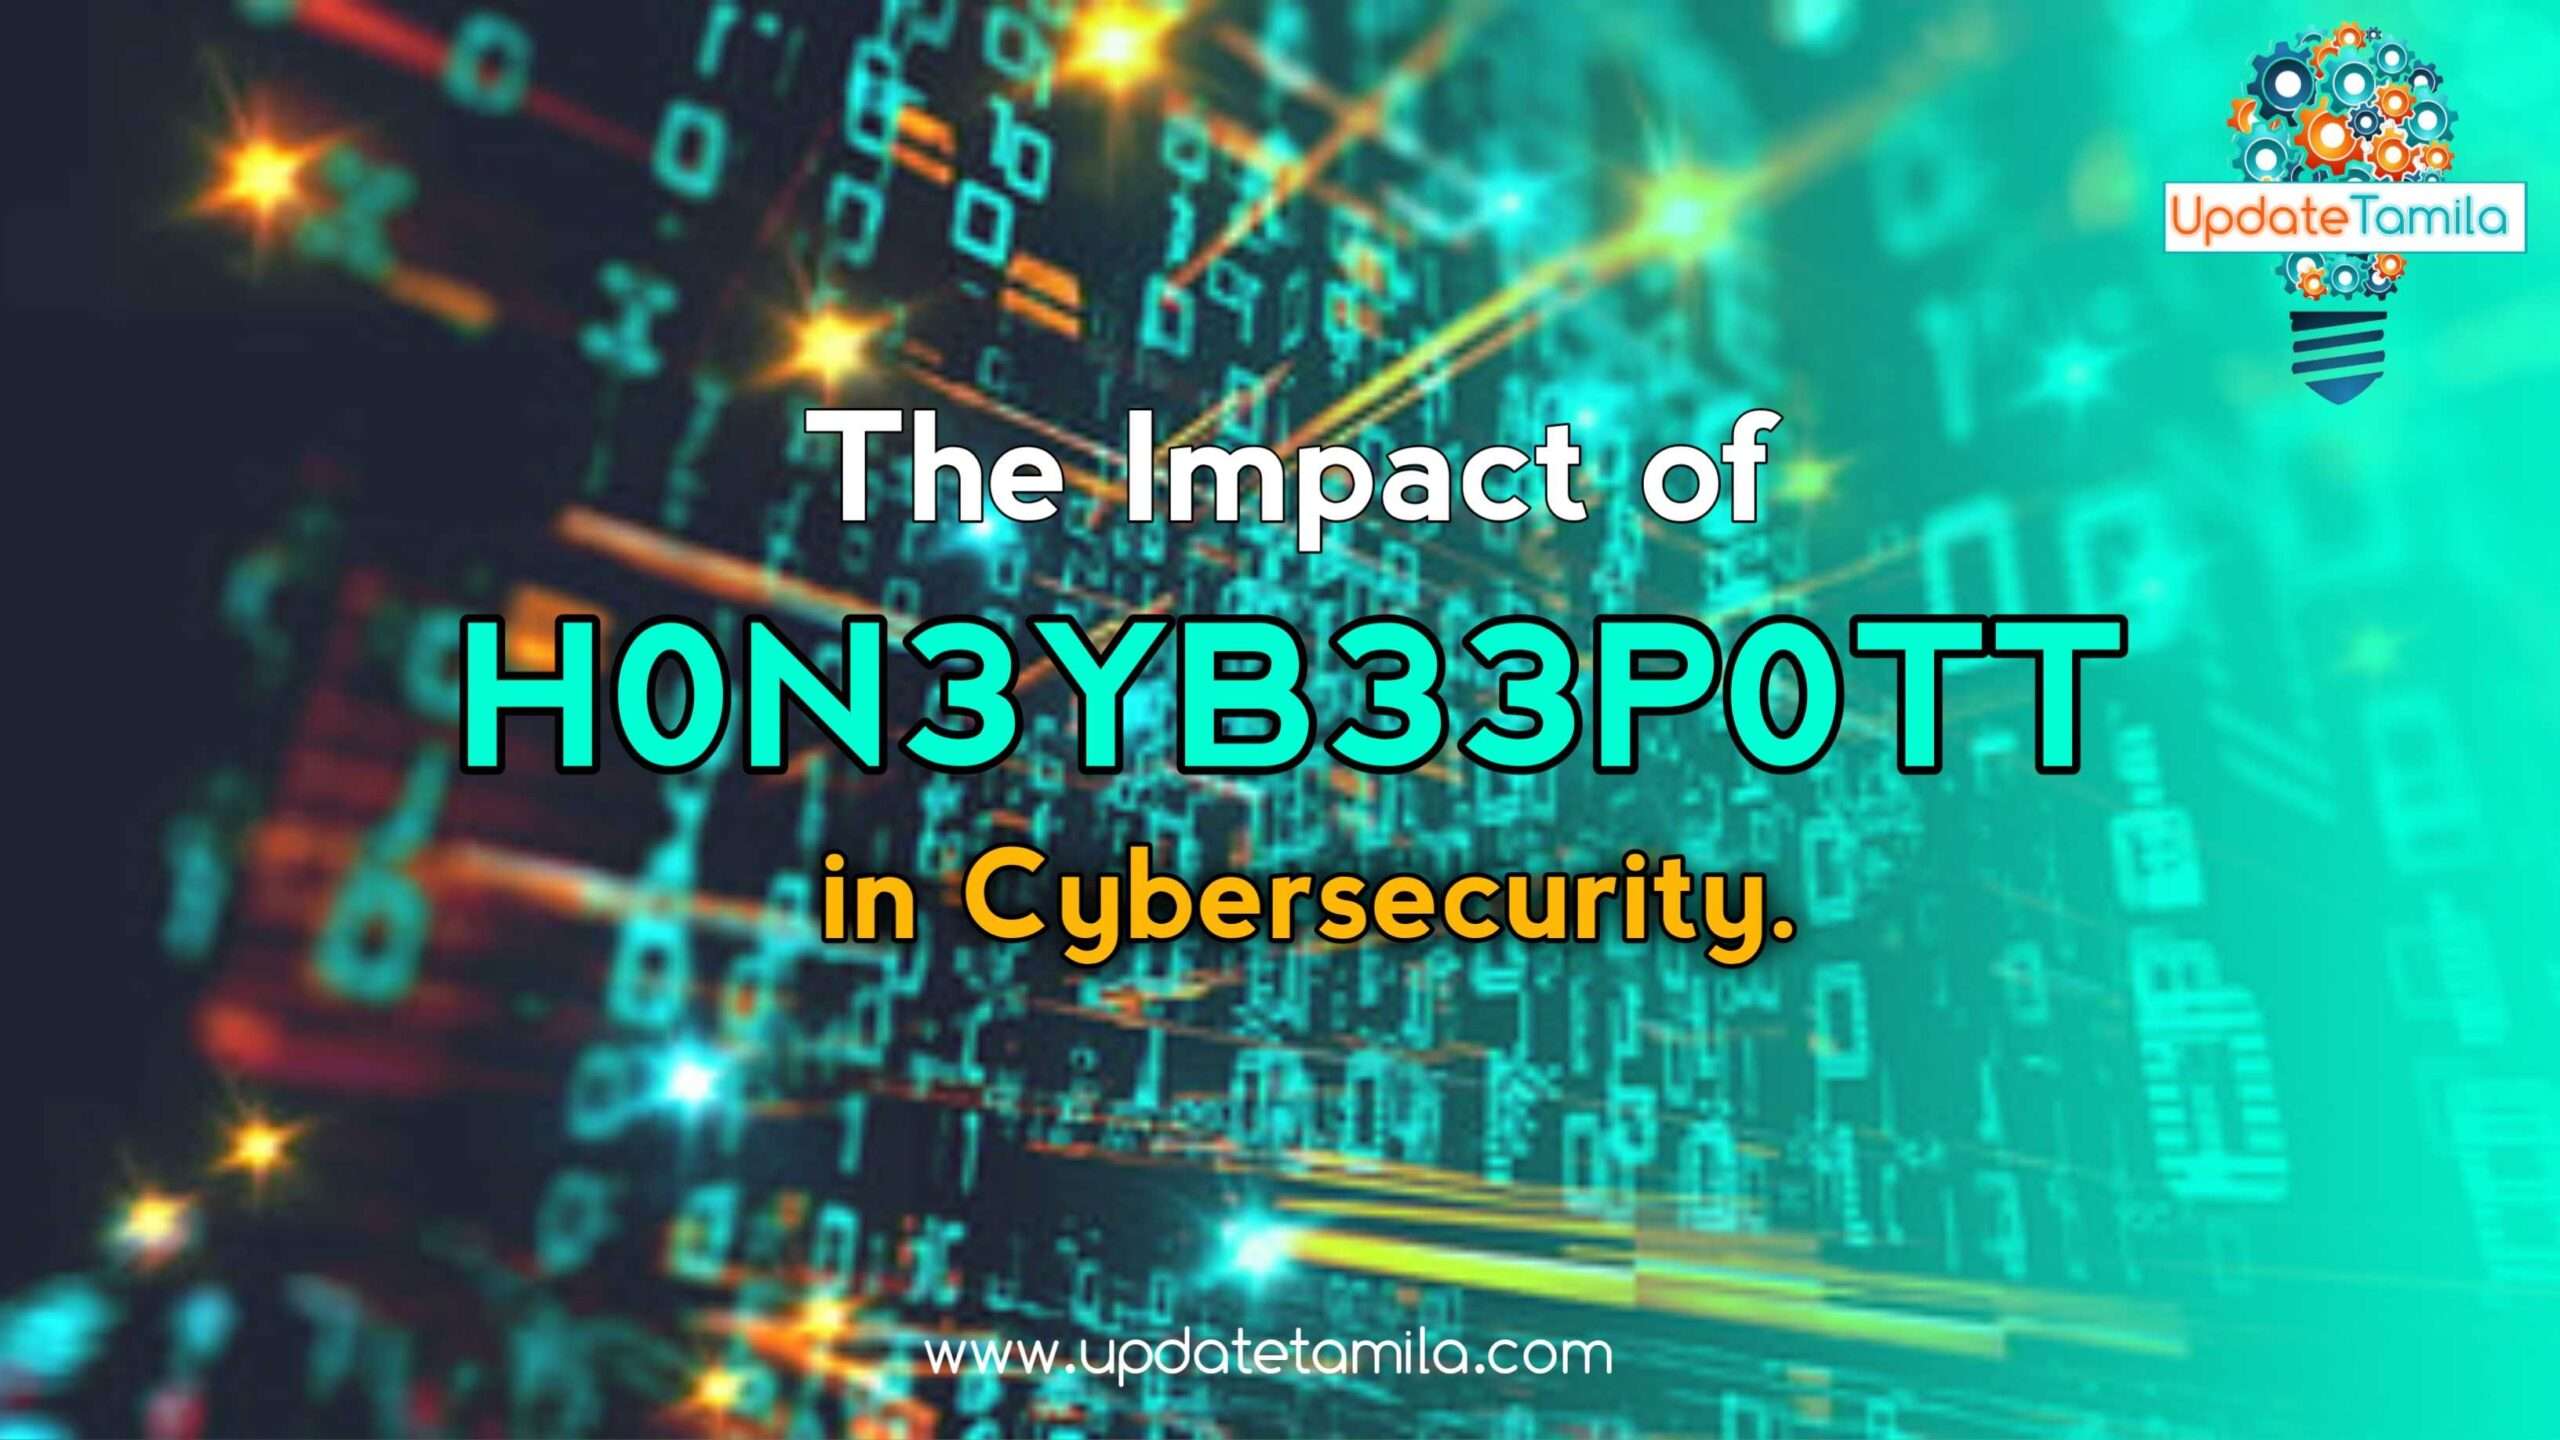 The Impact of H0N3YB33P0TT on Cybersecurity